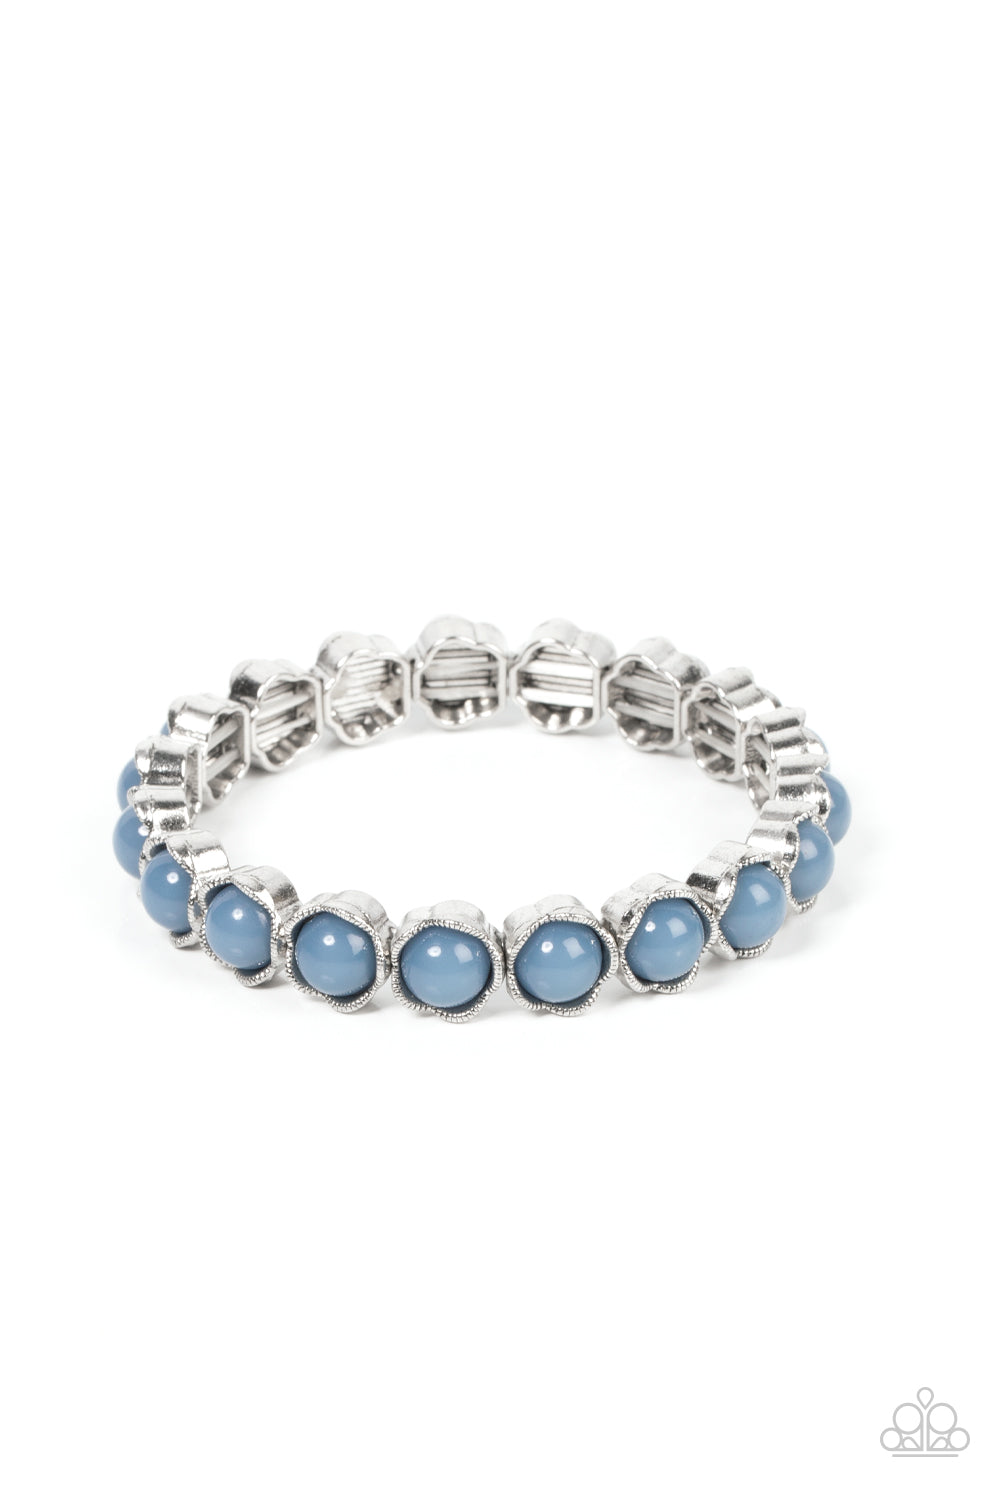 Paparazzi - Lets be Buds - Blue - Textured silver petals fold around dewy Spring Lake beads along stretchy bands, resulting in a flowery pop of color around the wrist.